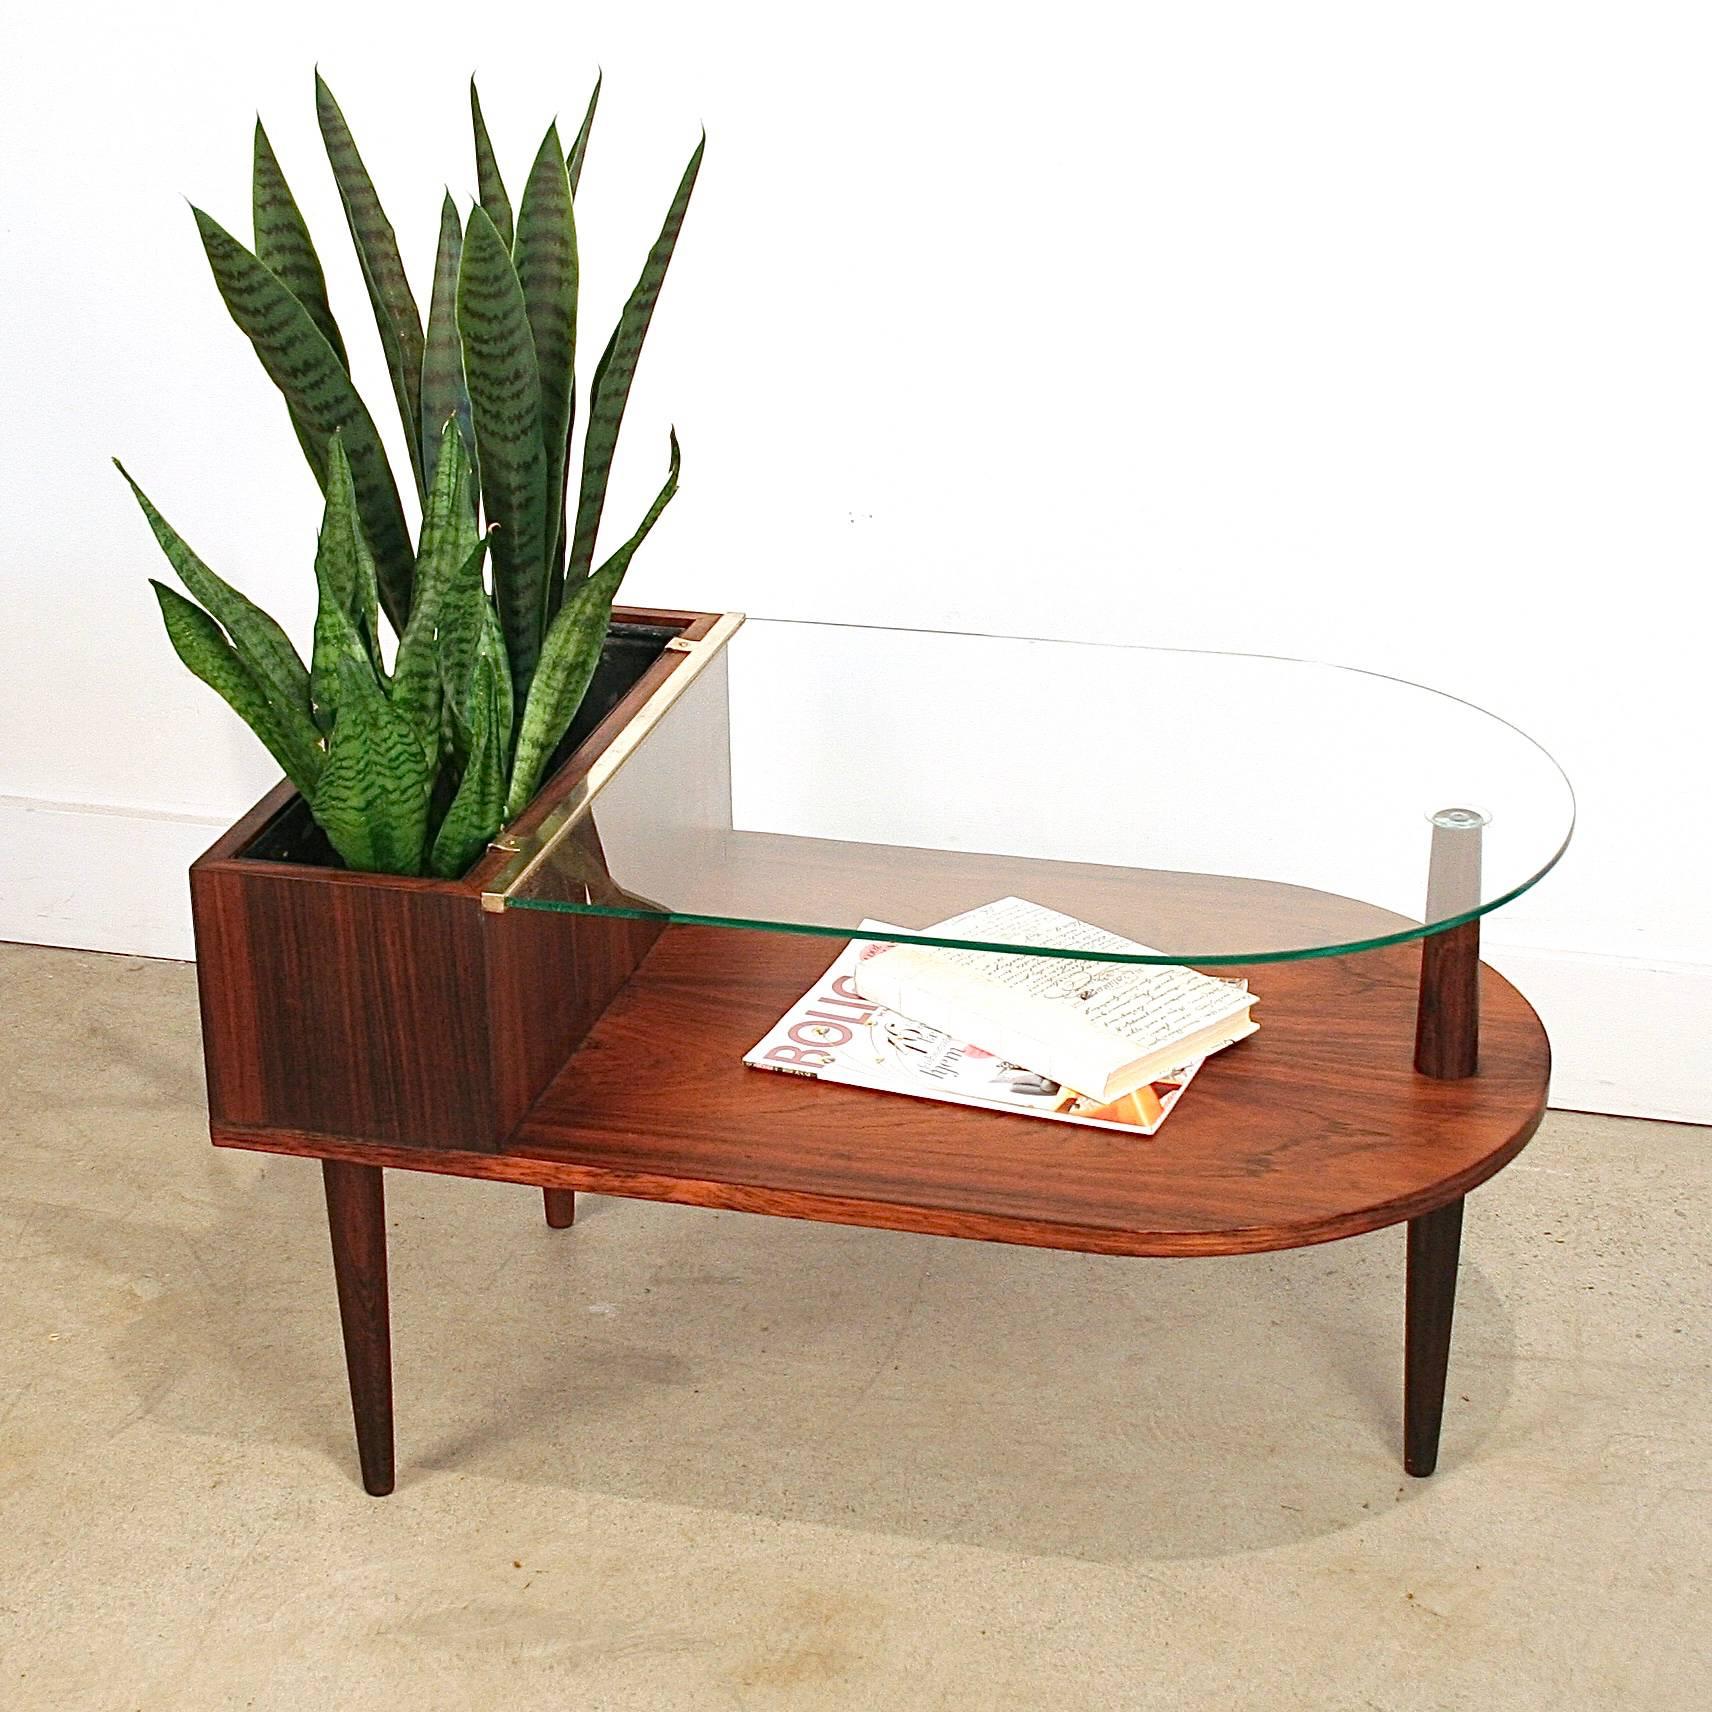 Wonderful unique vintage Danish glass and rosewood planter side, accent or coffee table. Features three solid rosewood legs, single rosewood shelf below a glass tabletop and planter. Made in Denmark.